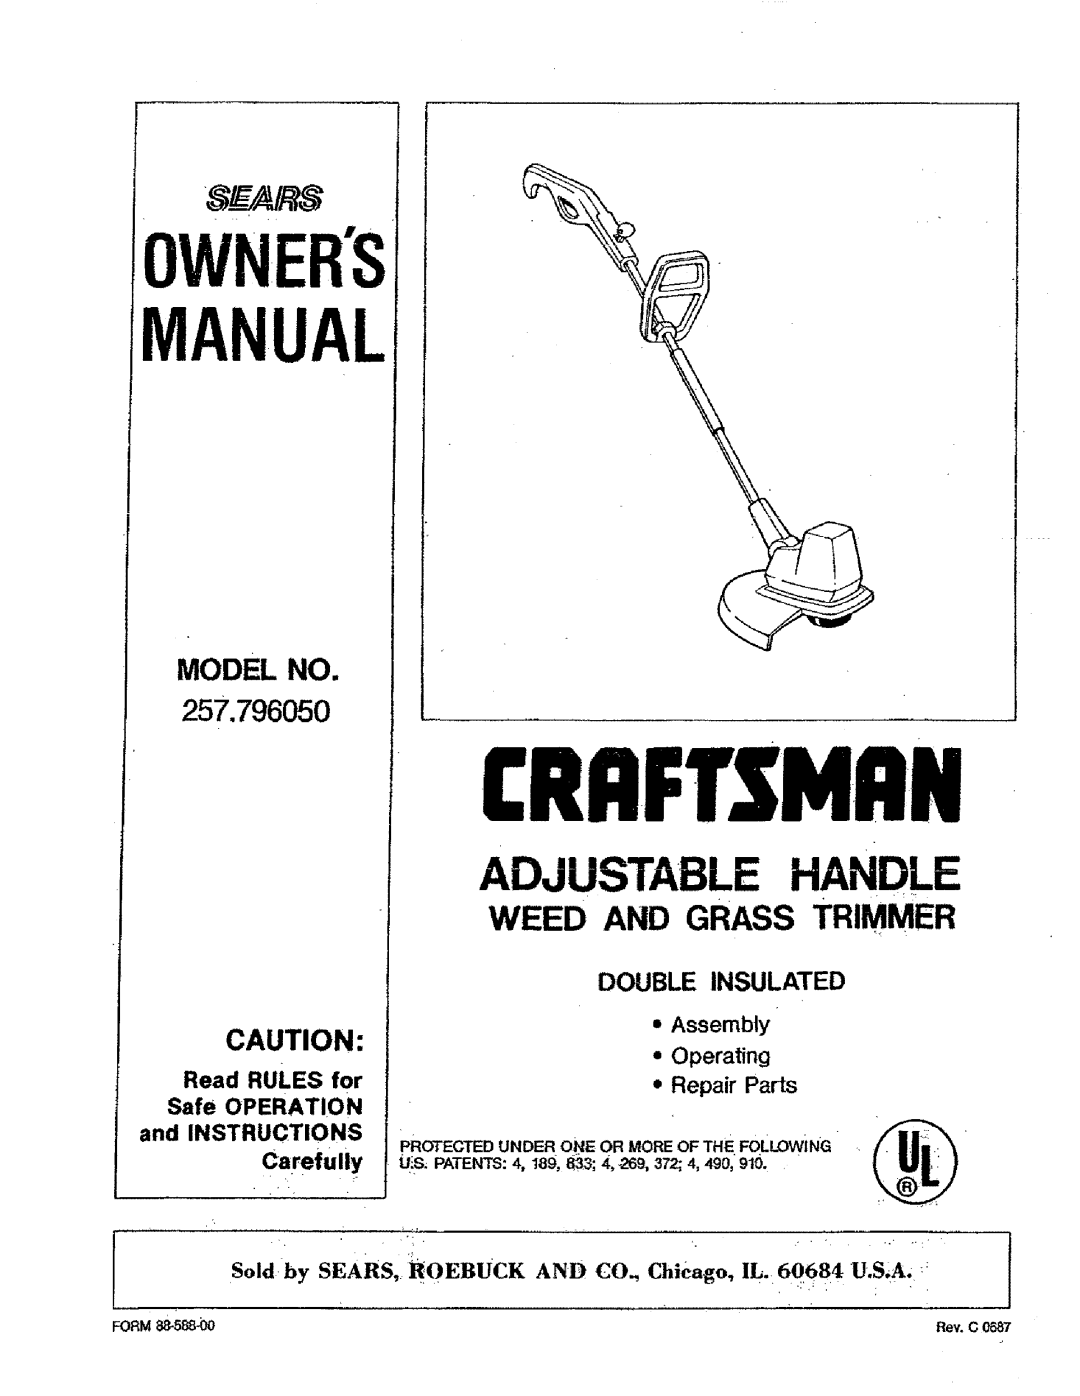 Sears manual Double Insulated, Ers Manual, Adjustable Handle, Weed And Grass Trimmer, Model No, 257.796050, Assembly 